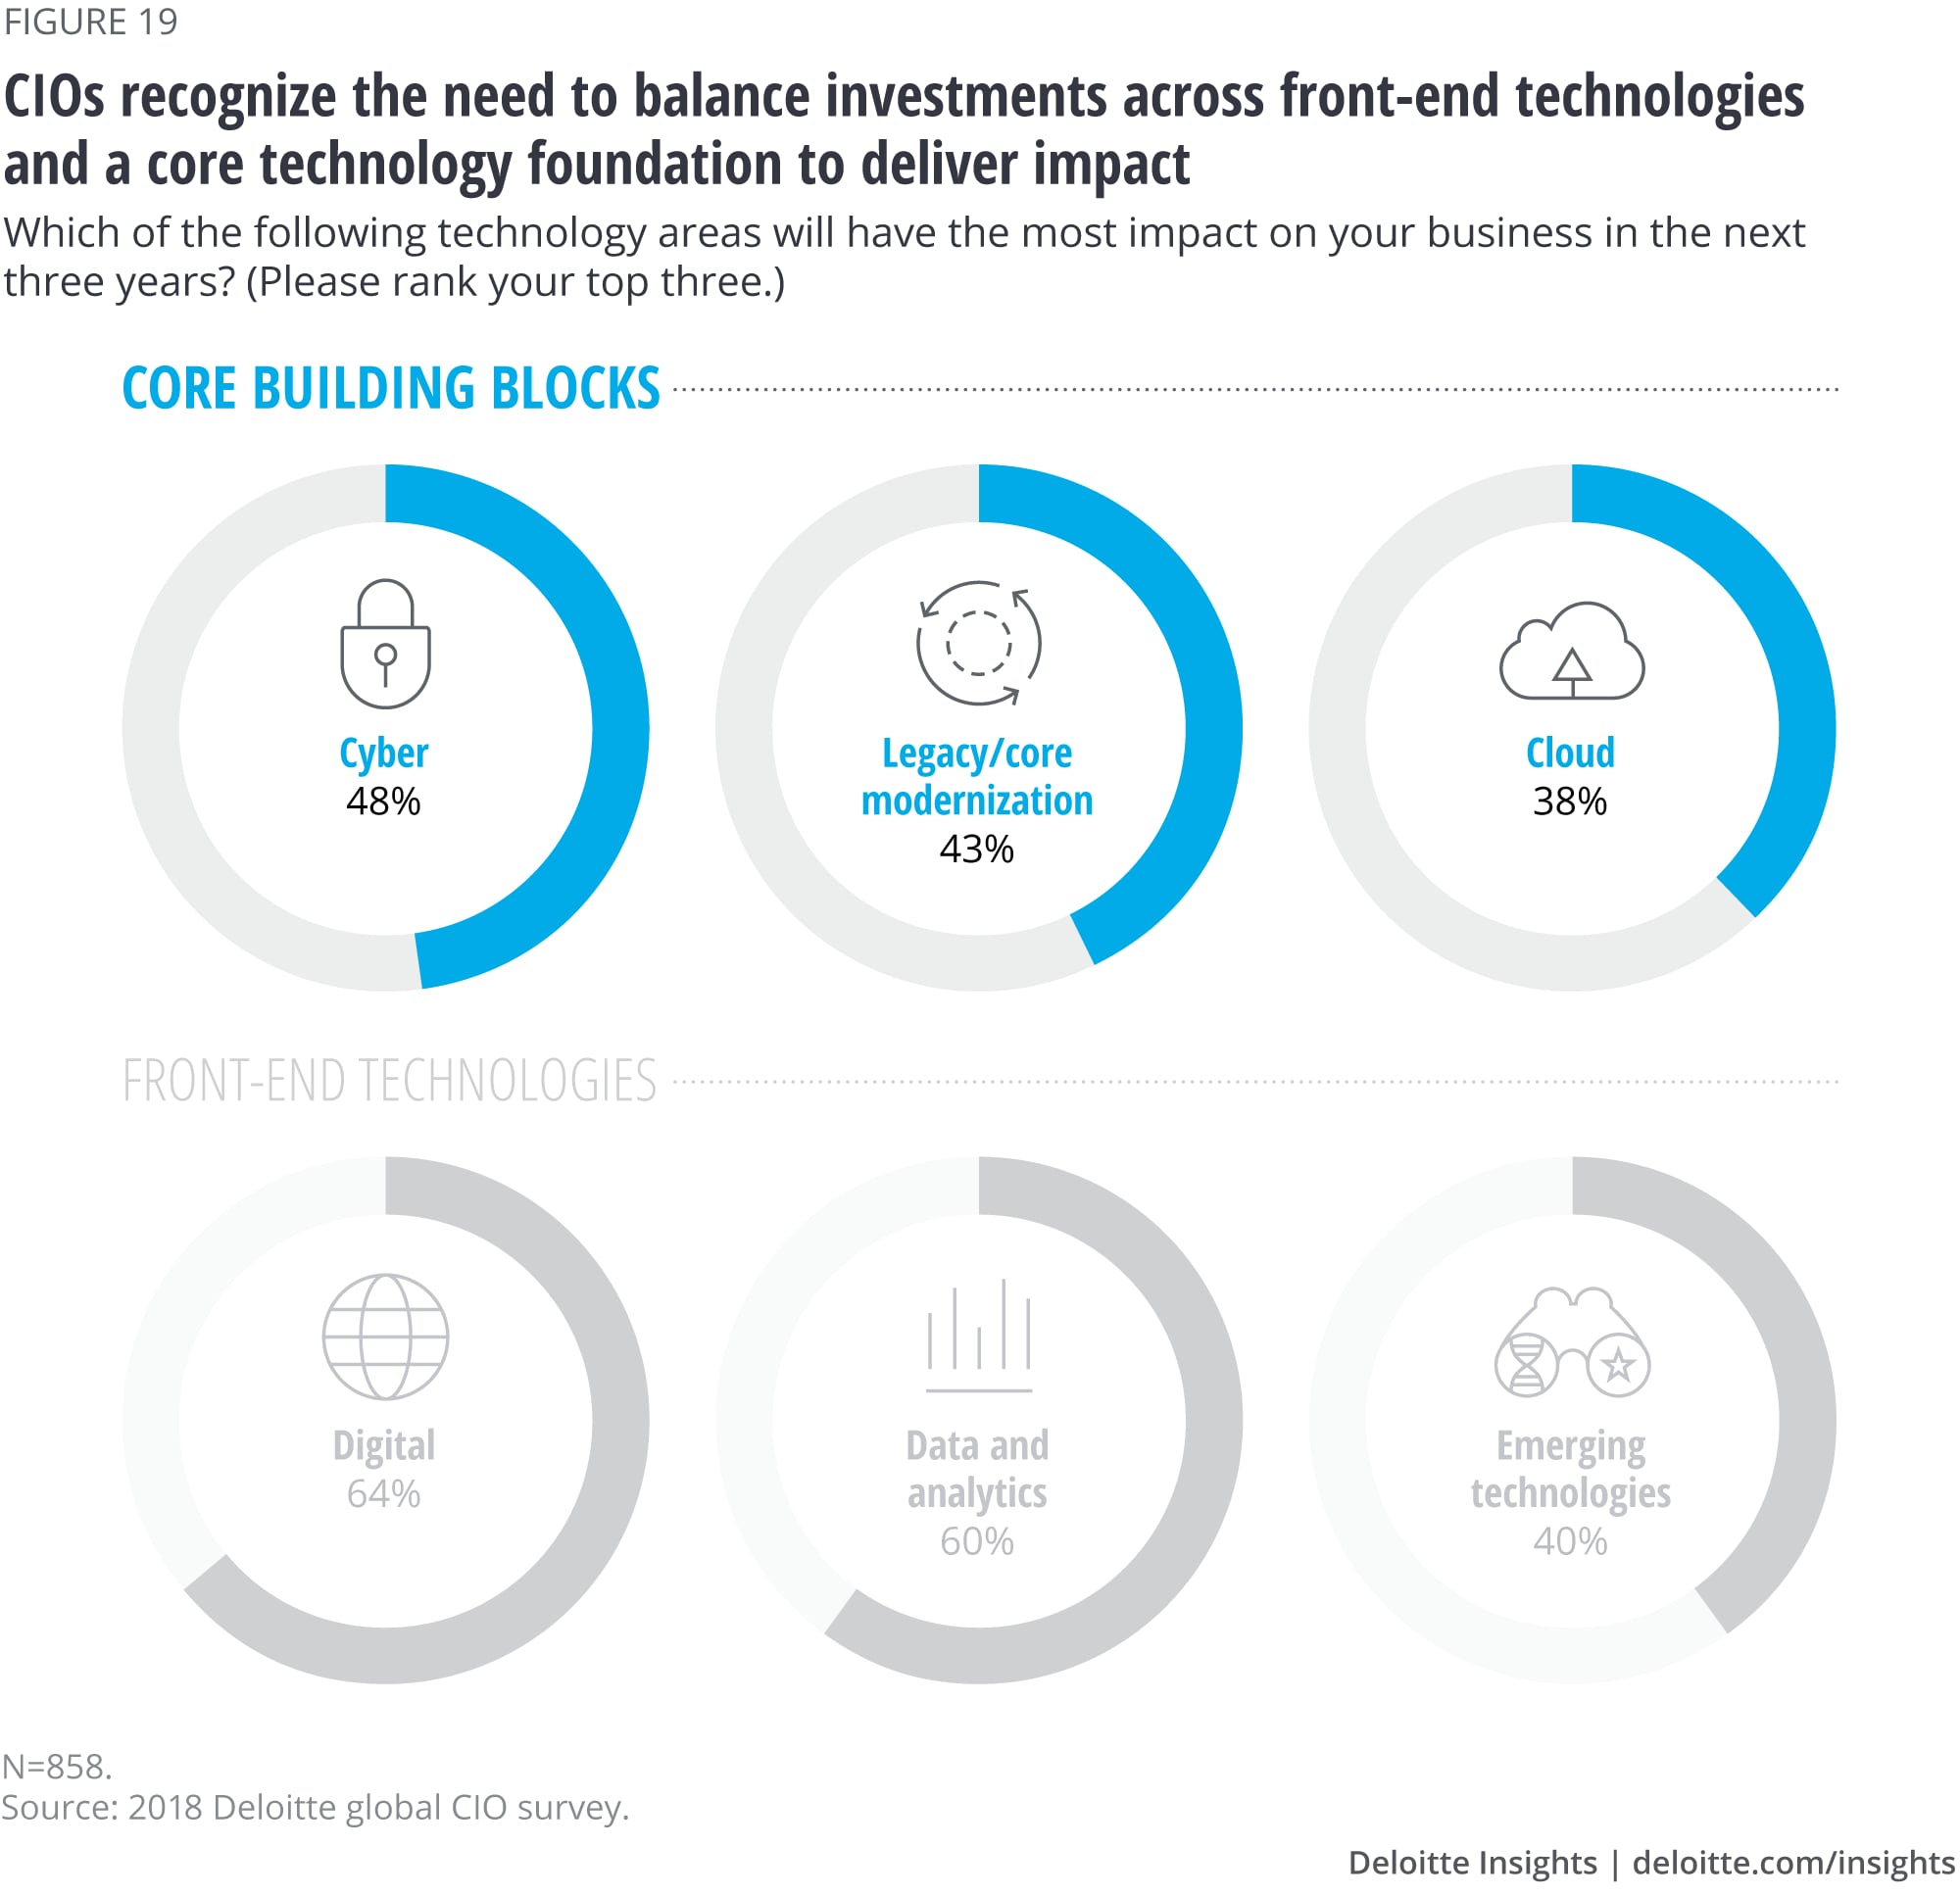 CIOs recognize the need to balance investments across front-end technologies and a core technology foundation to deliver impact